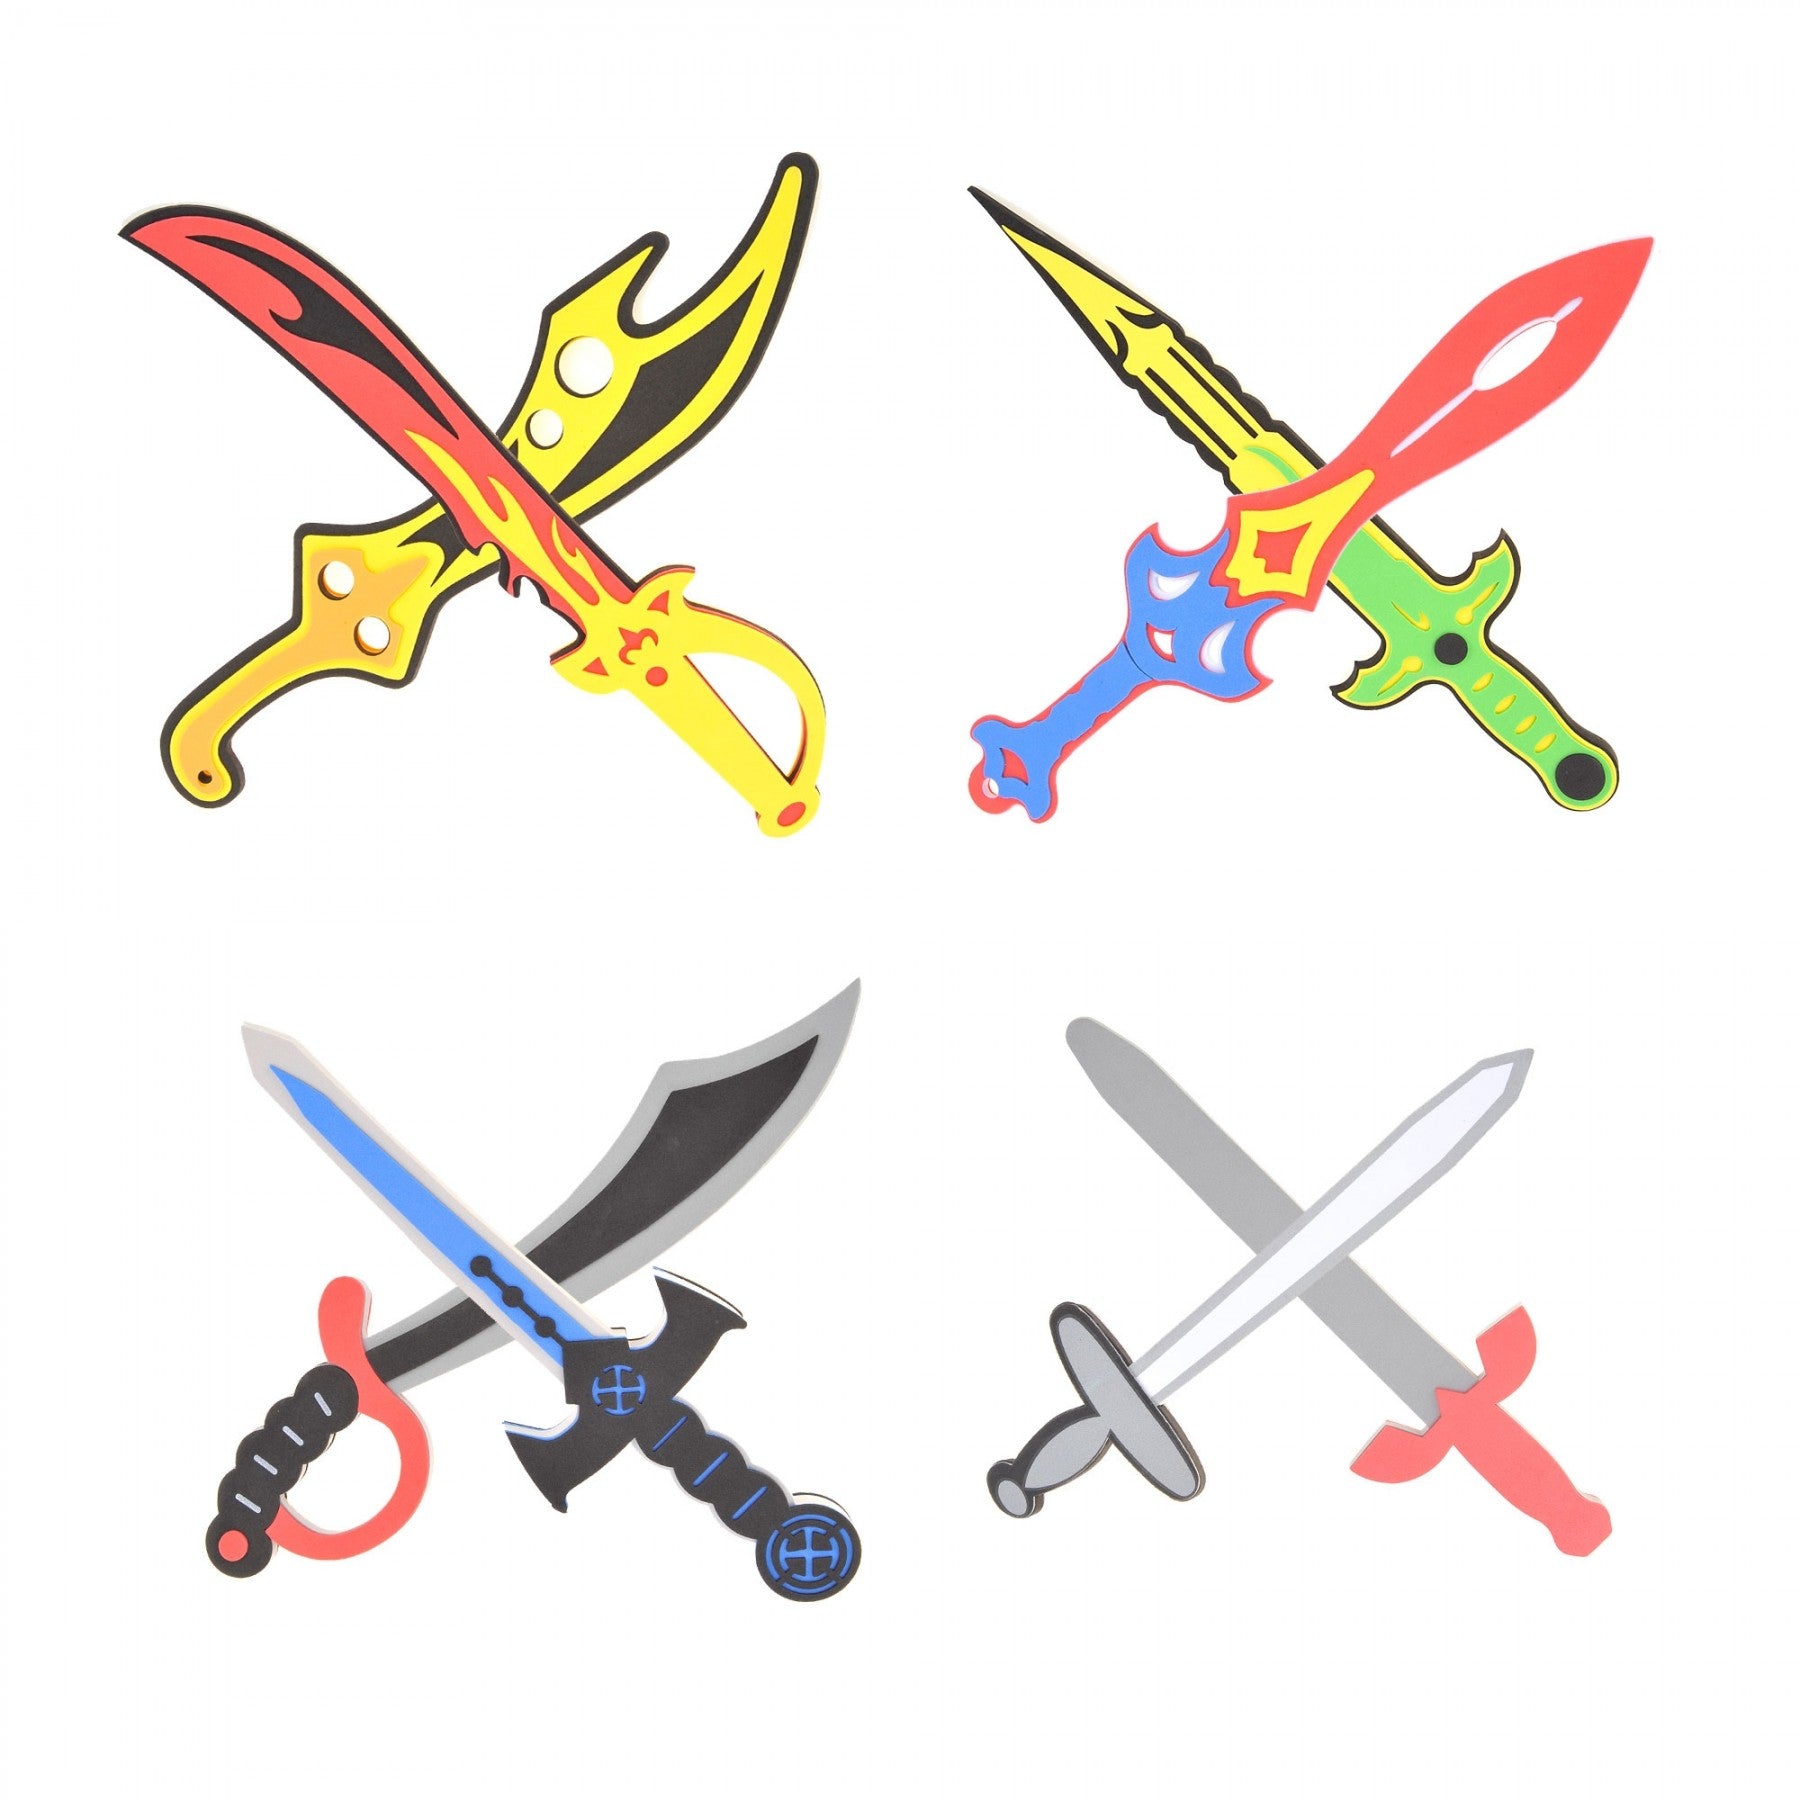 Foam Swords And Shields Playset (8 Swords And 4 Shields)